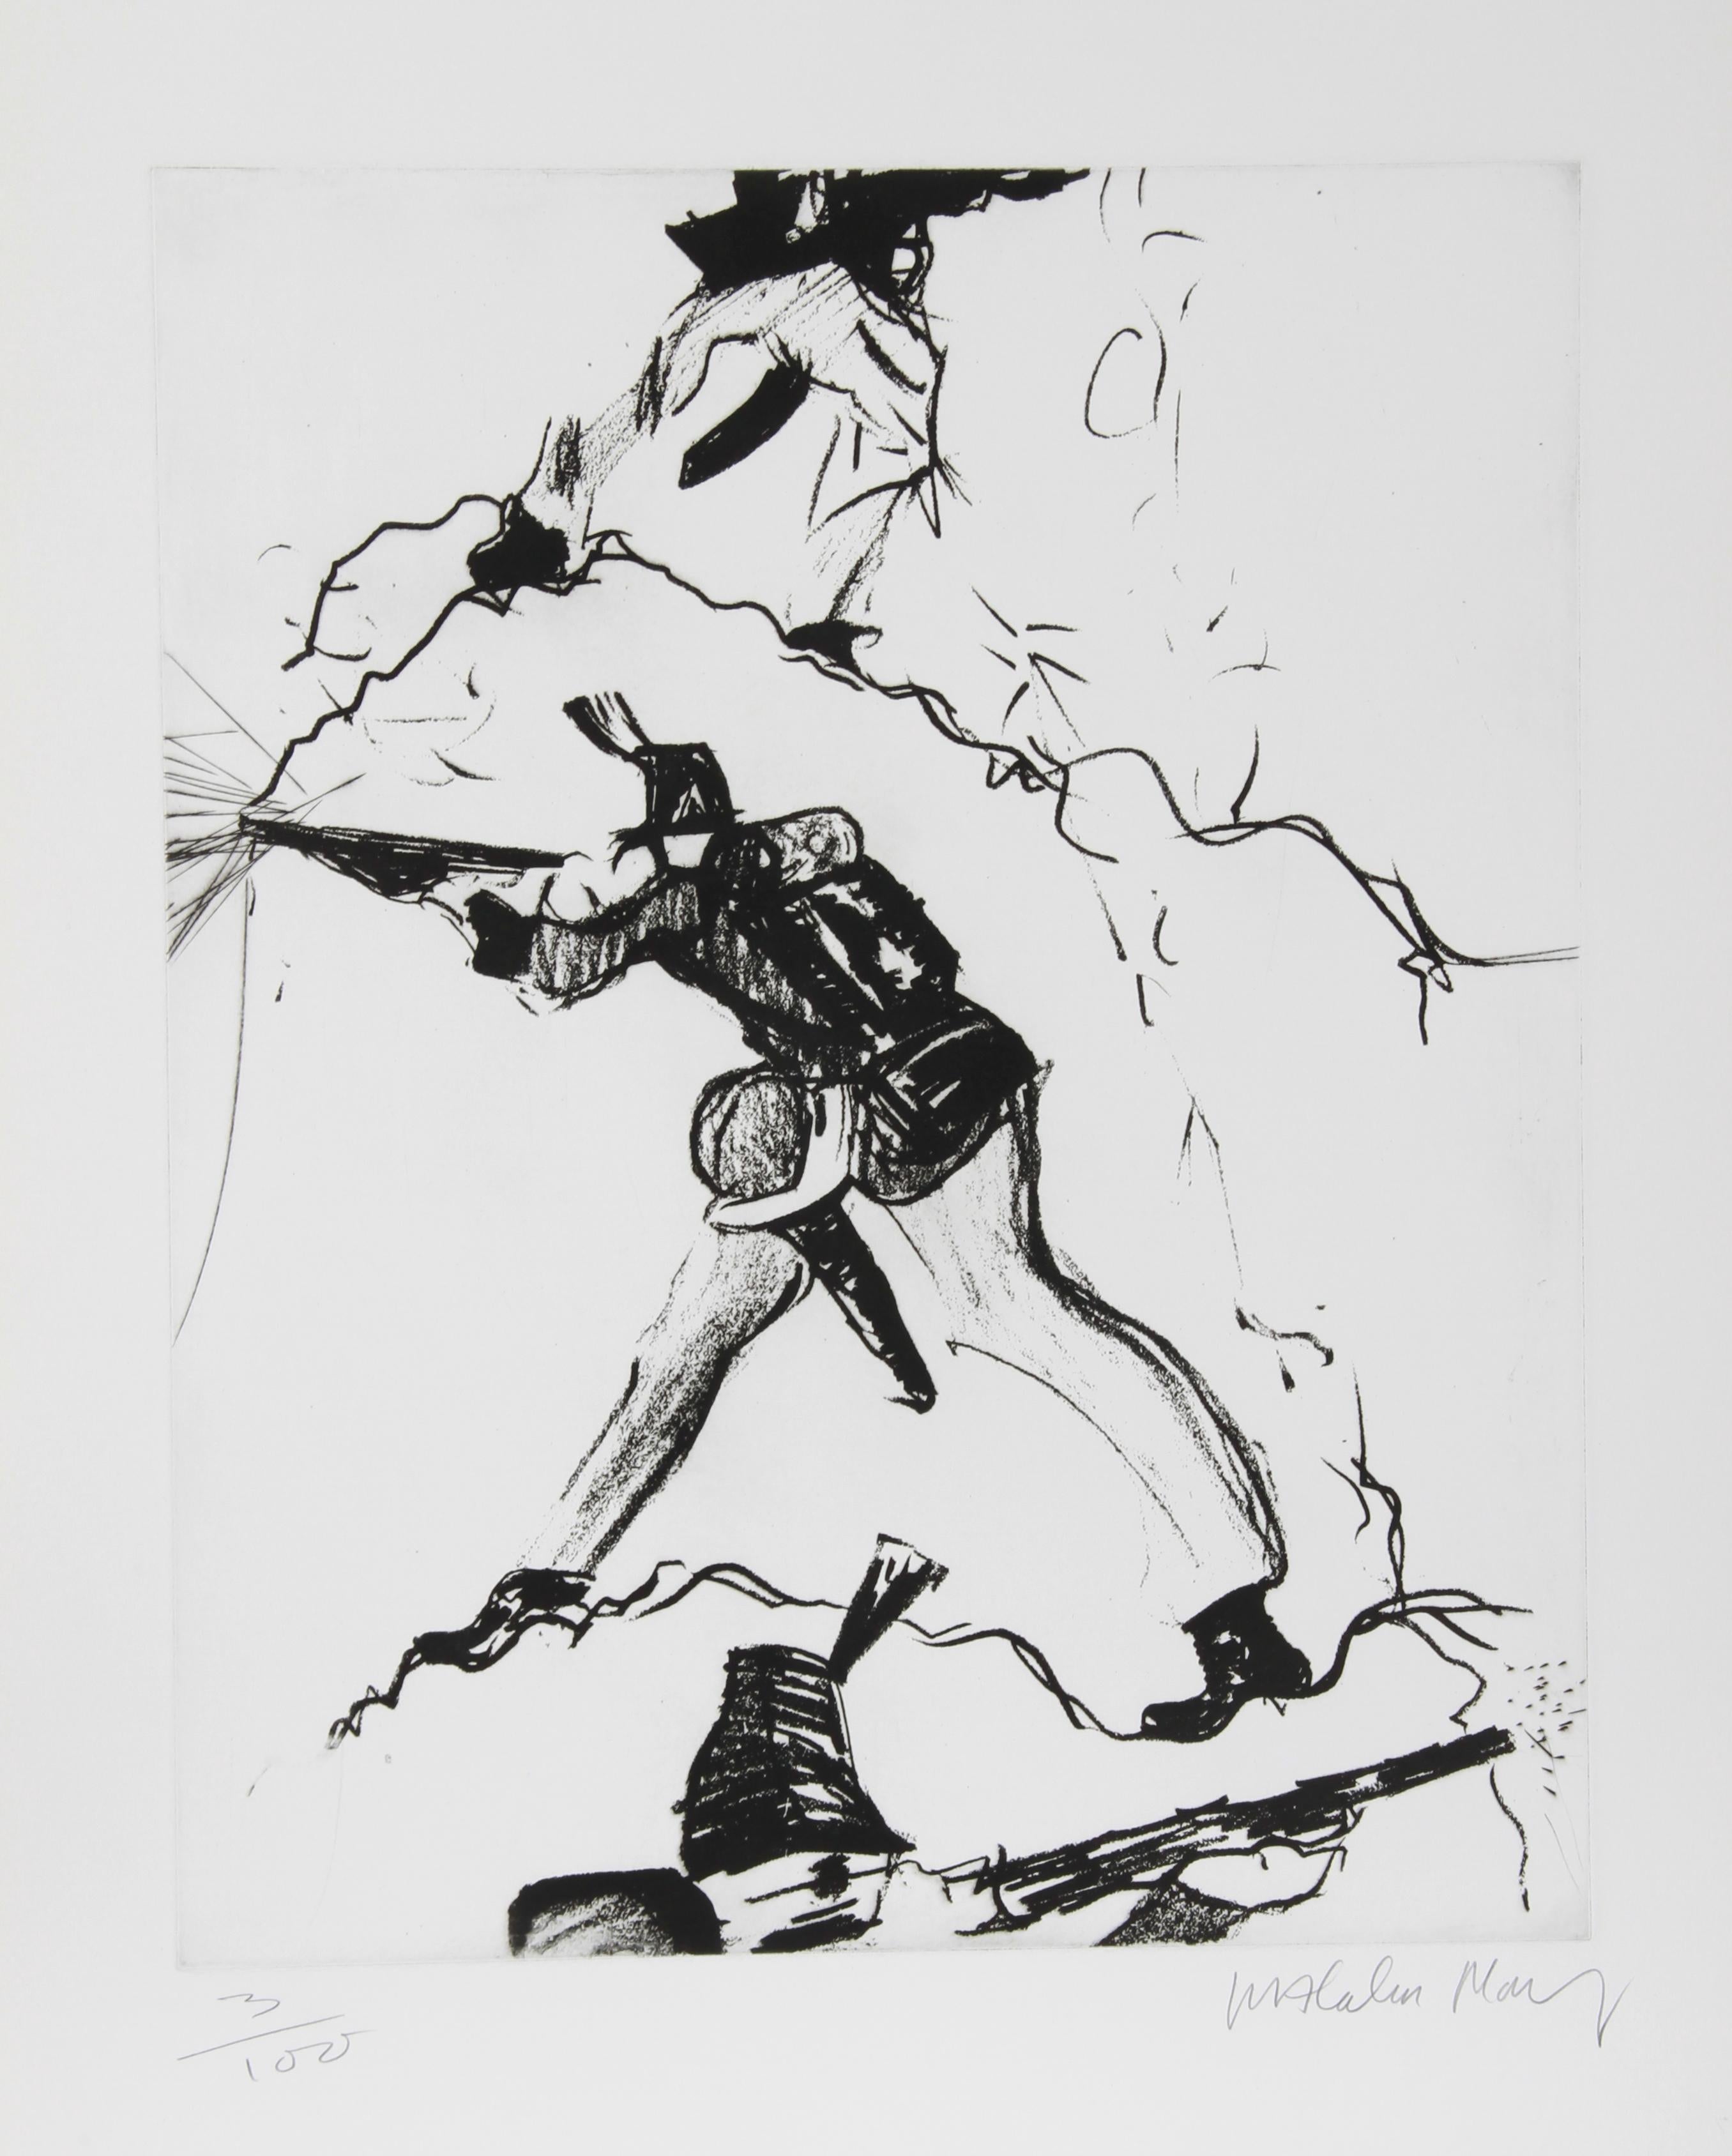 Artist: Malcolm Morley, British (1931 - 2018)
Title: Soldier
Year: Circa 1980
Medium: Etching, signed and numbered in pencil
Edition: 100
Image Size: 22 x 18 inches
Size: 30 in. x 22.5 in. (76.2 cm x 57.15 cm)